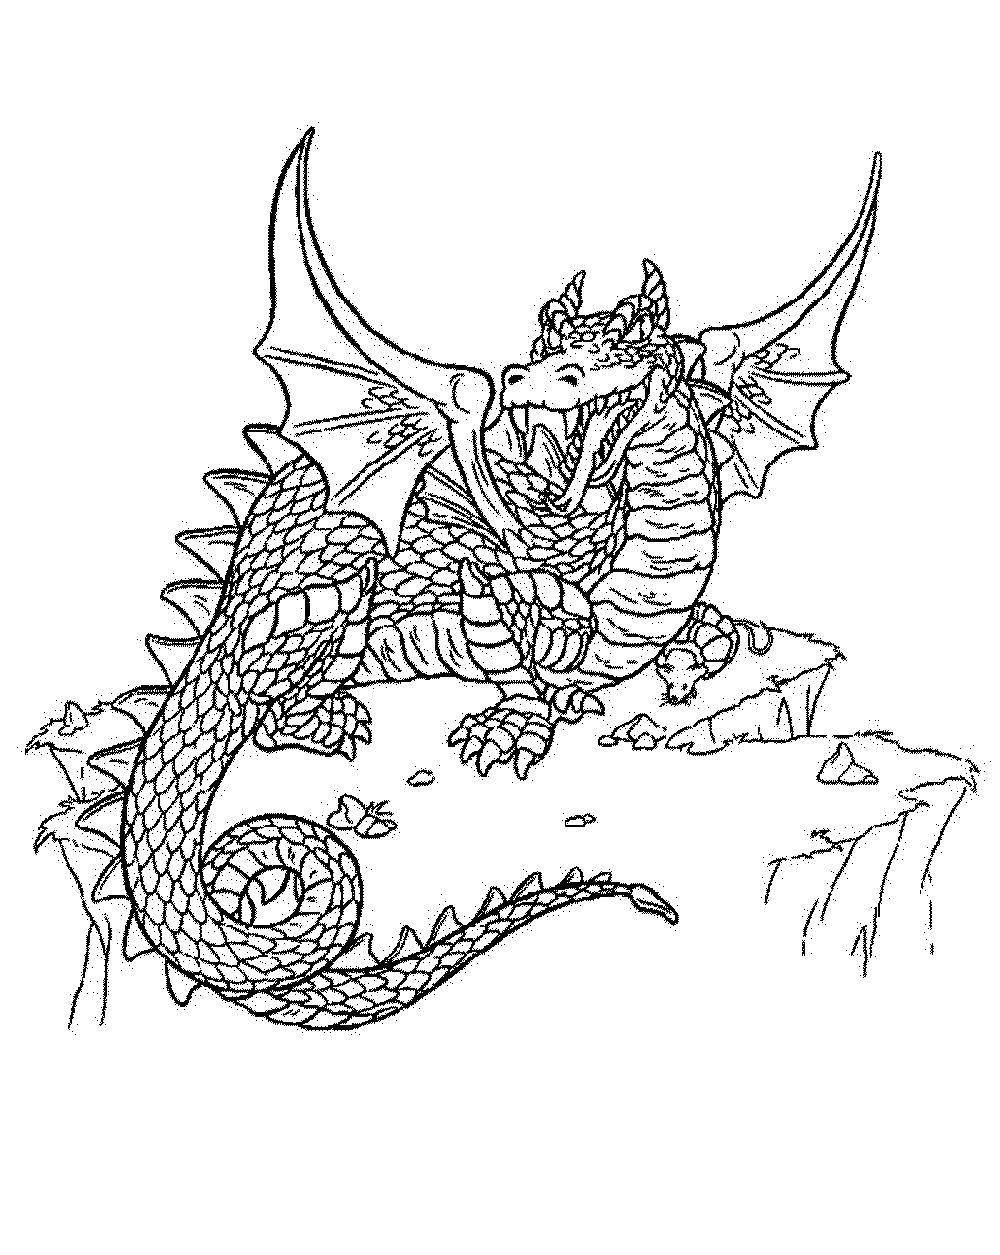 Coloring Ancient dragon. Category the dragon. Tags:  Dragons.